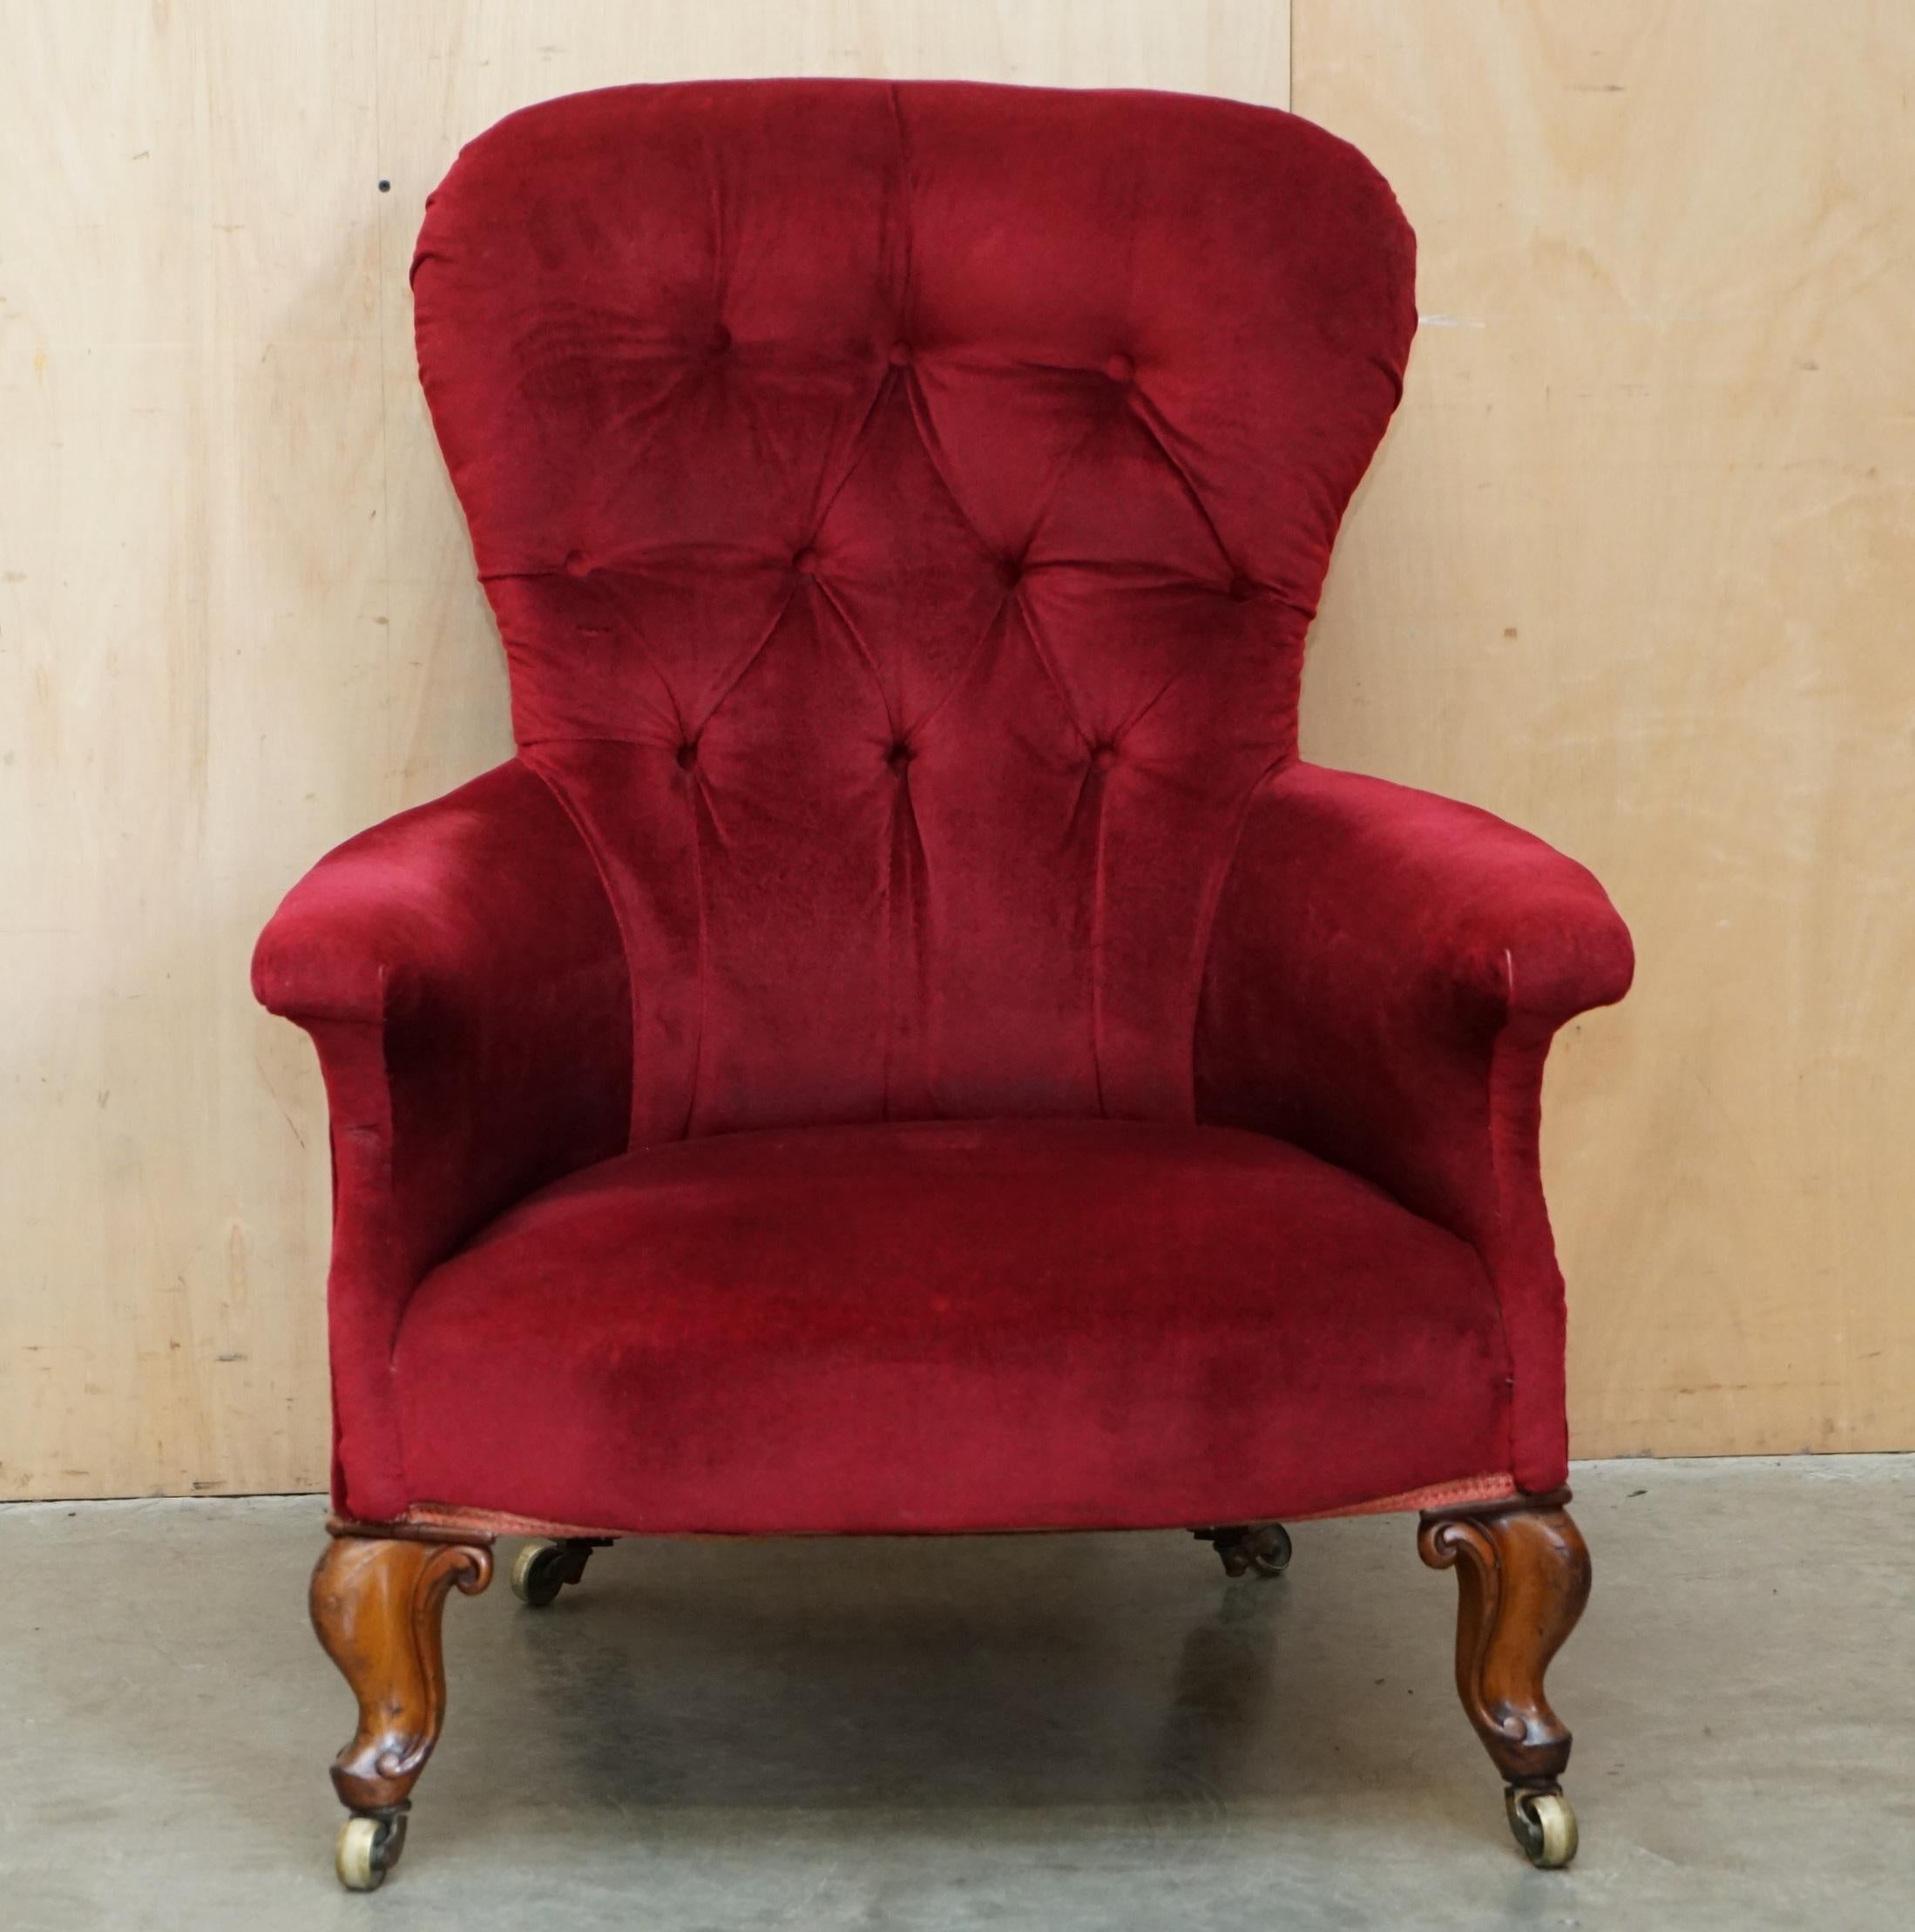 Royal House Antiques

Royal House Antiques is delighted to offer for sale this absolutely stunning antique circa 1830 William IV Chesterfield tufted library armchair with ornately carved walnut legs

Please note the delivery fee listed is just a